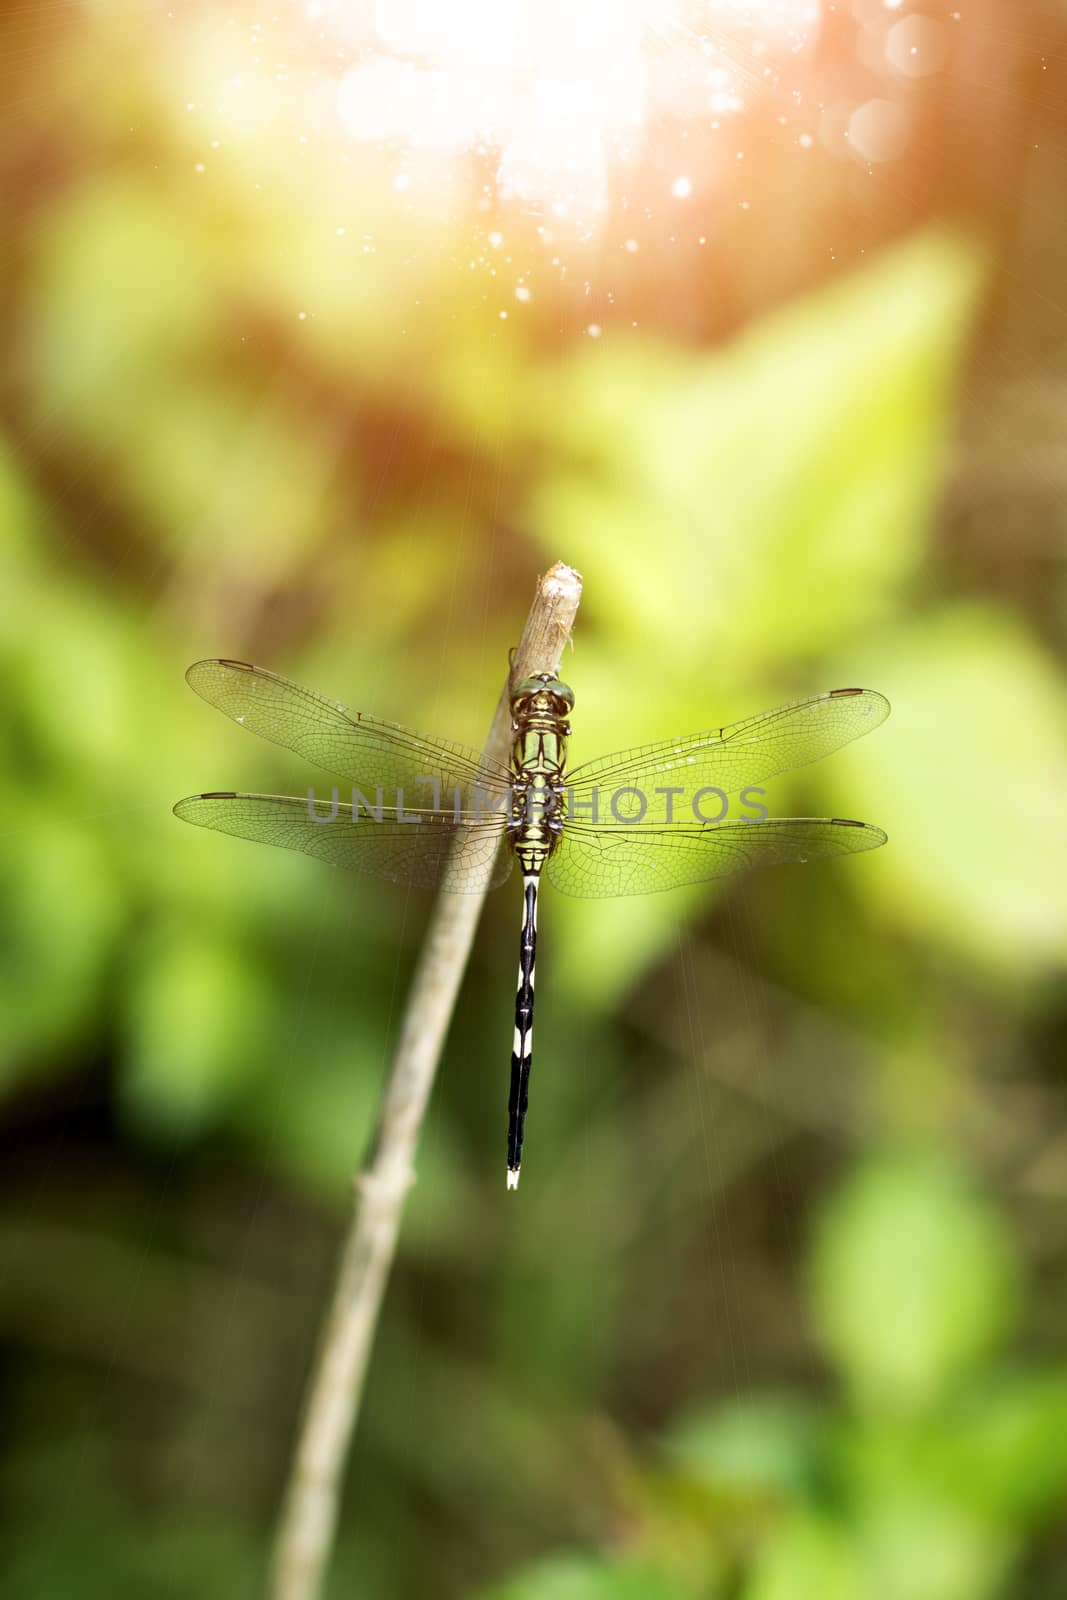 Close-up image of a dragonfly